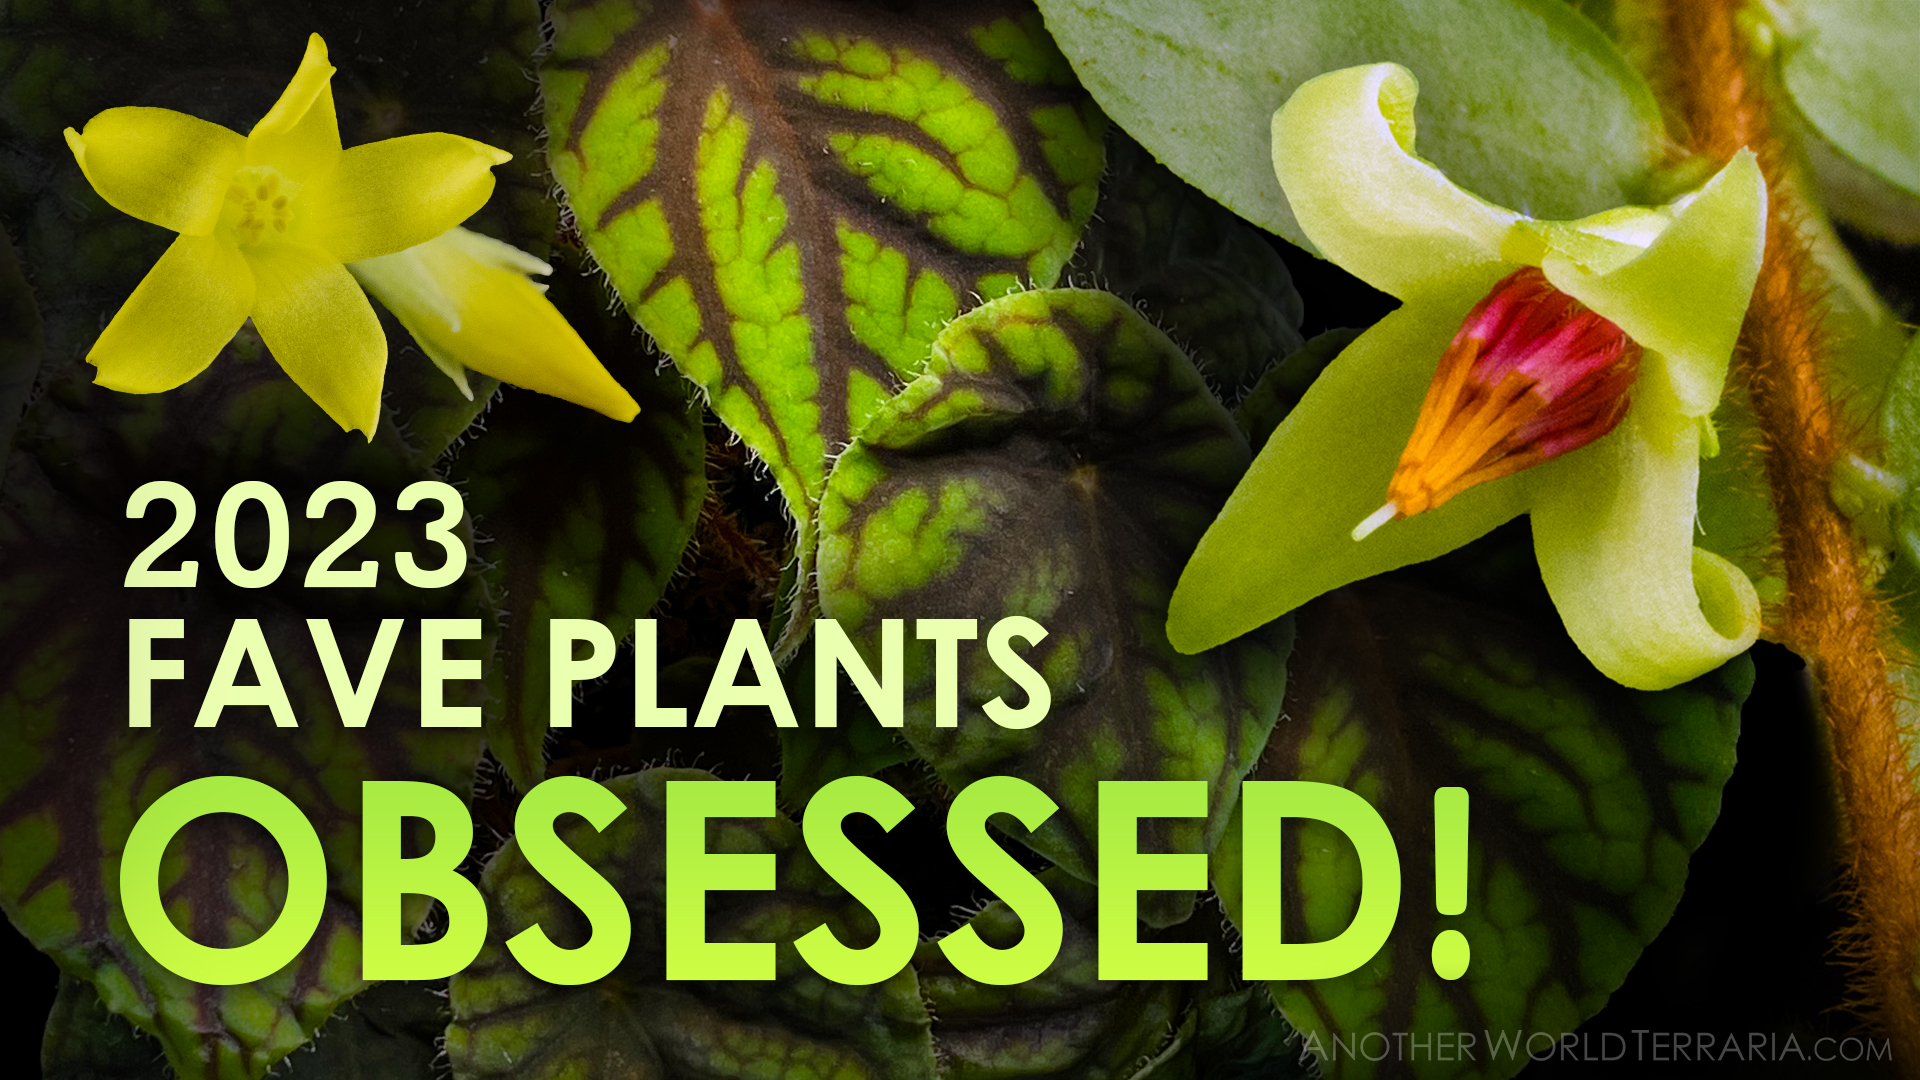 2023 Fave Plants - Obsessed!